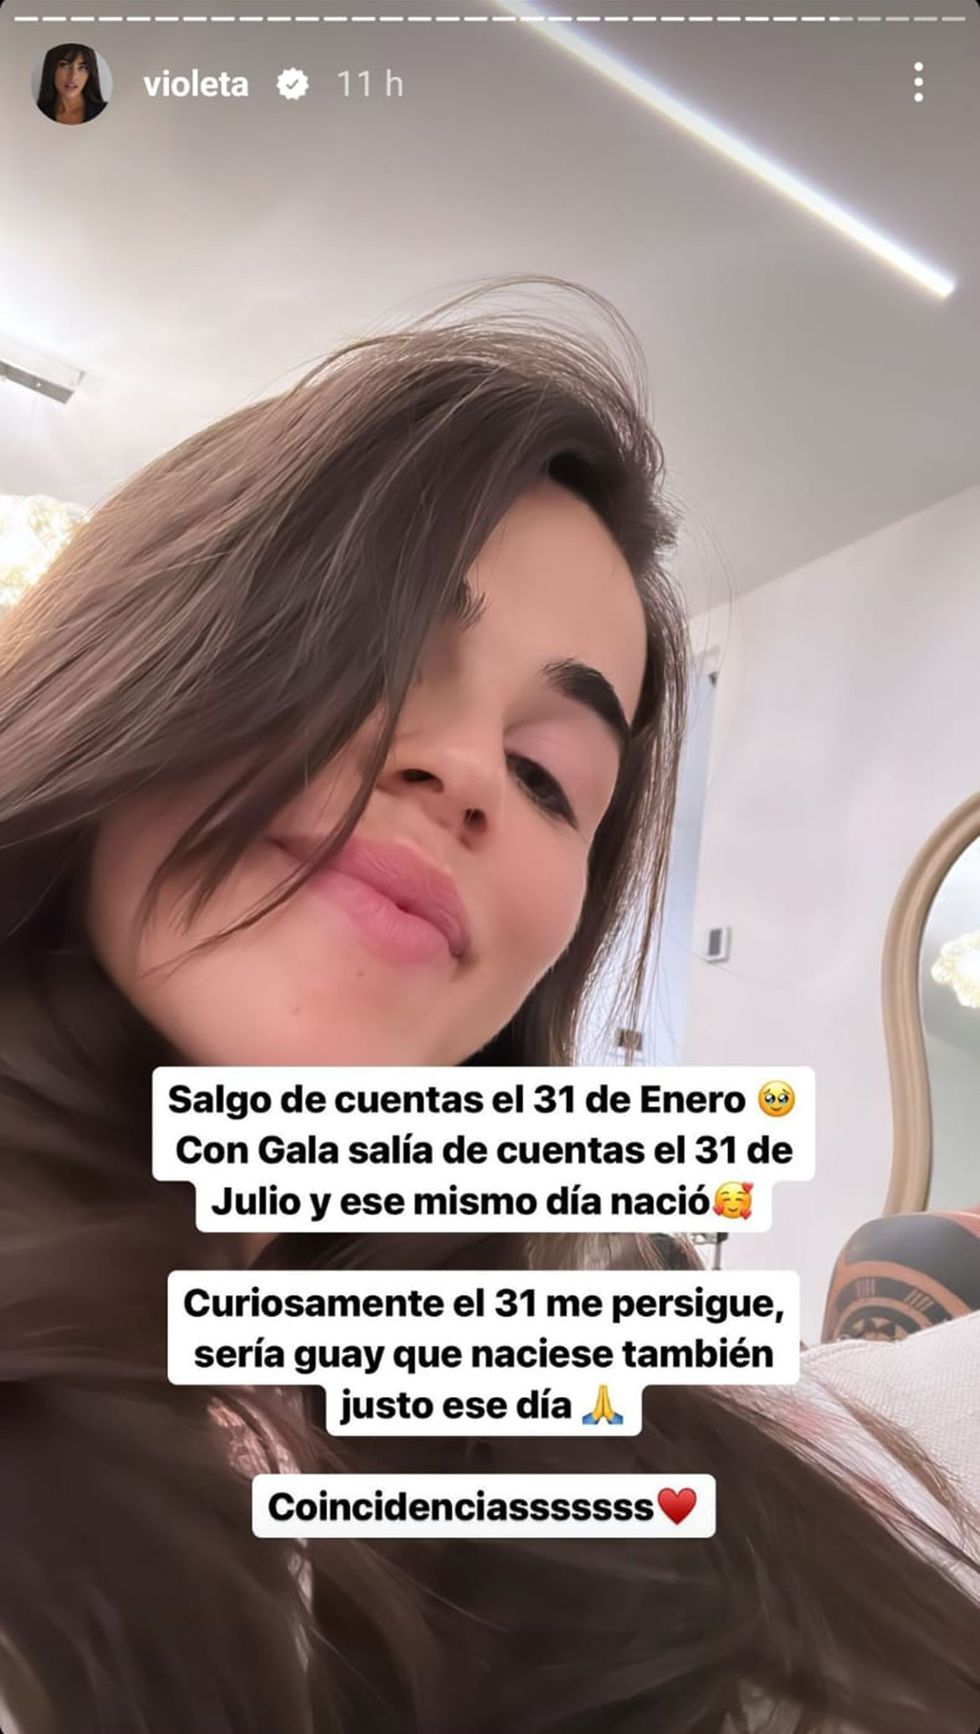 violet mangriñán confirms on instagram what day she is due in her second pregnancy